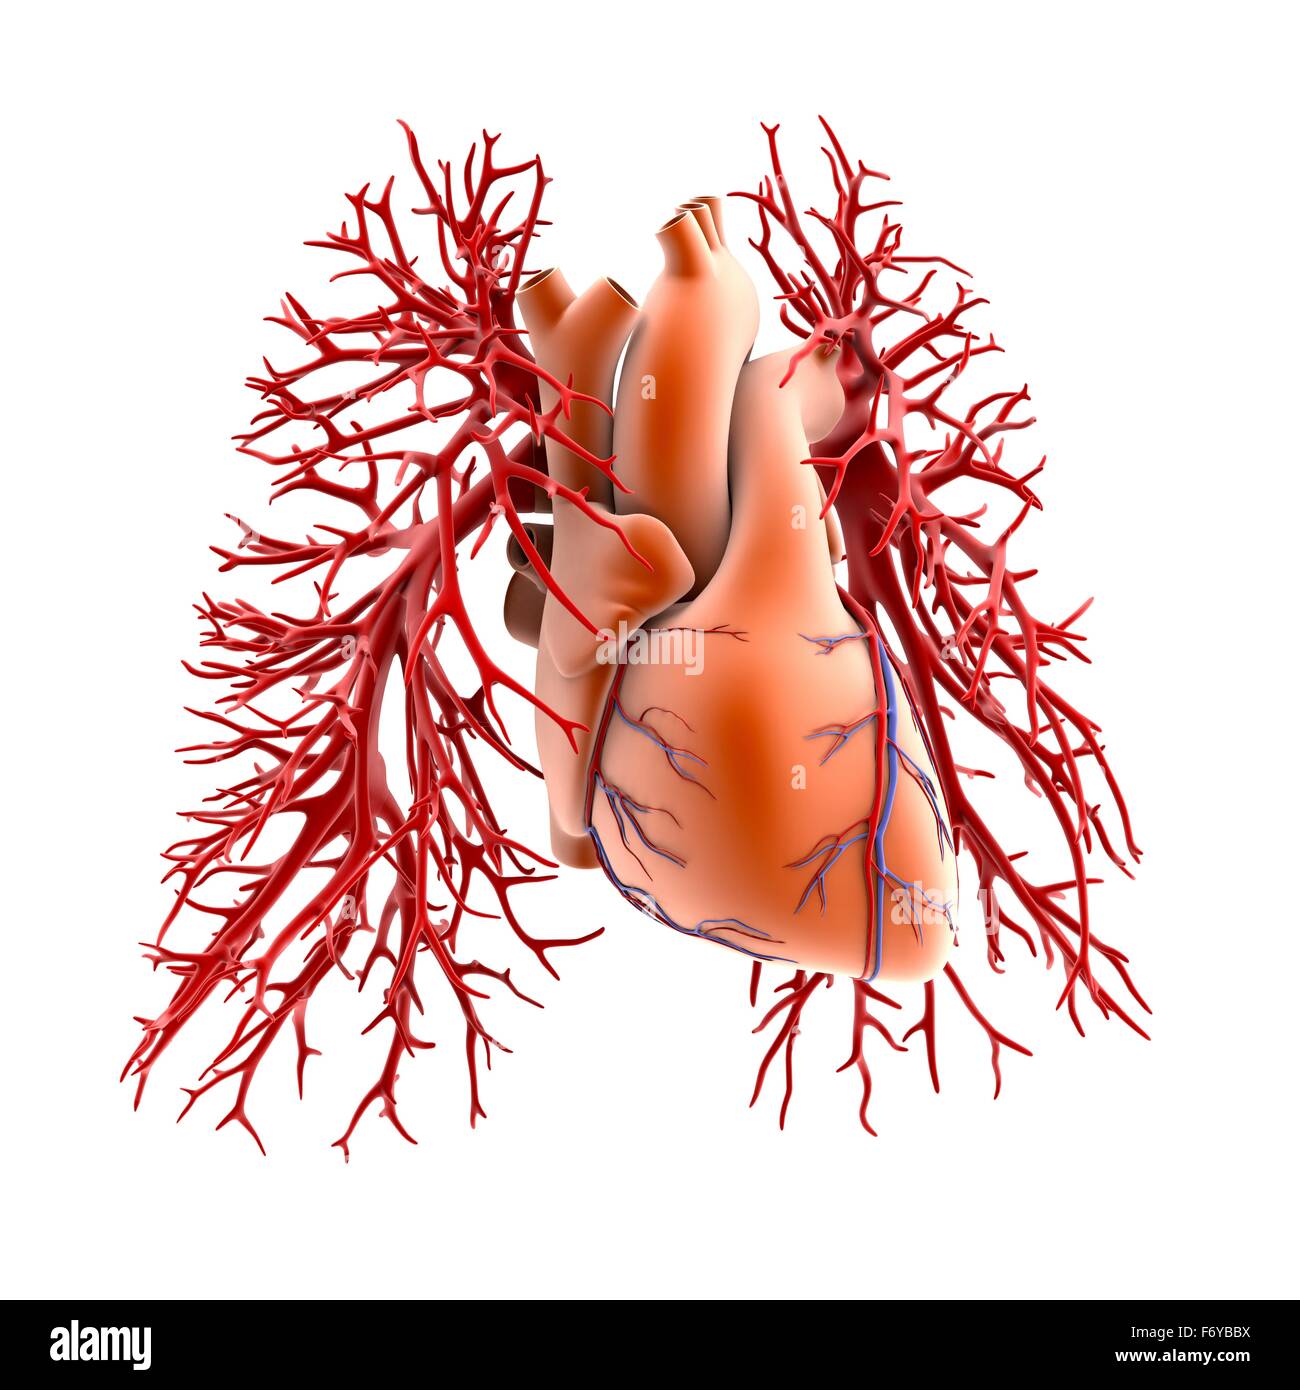 Circulatory system of heart and lungs, computer artwork. The heart (centre) is a hollow muscle that pumps blood around the body. The two branches of the pulmonary artery (red) carry deoxygenated blood from the heart to the lungs Stock Photo